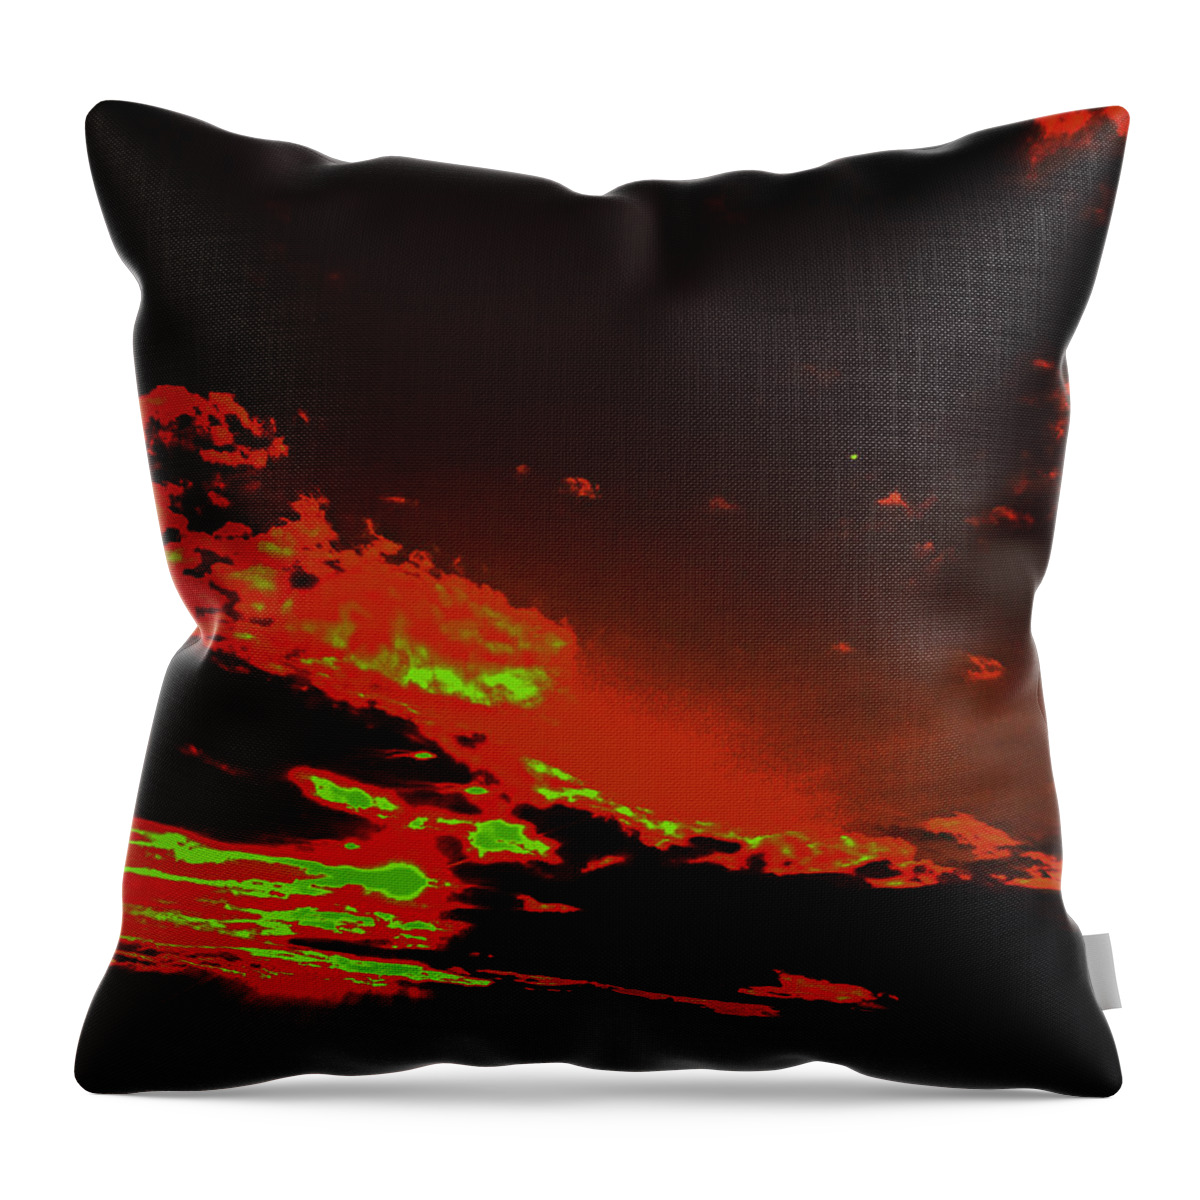  Throw Pillow featuring the photograph Sky Fires by Trevor A Smith